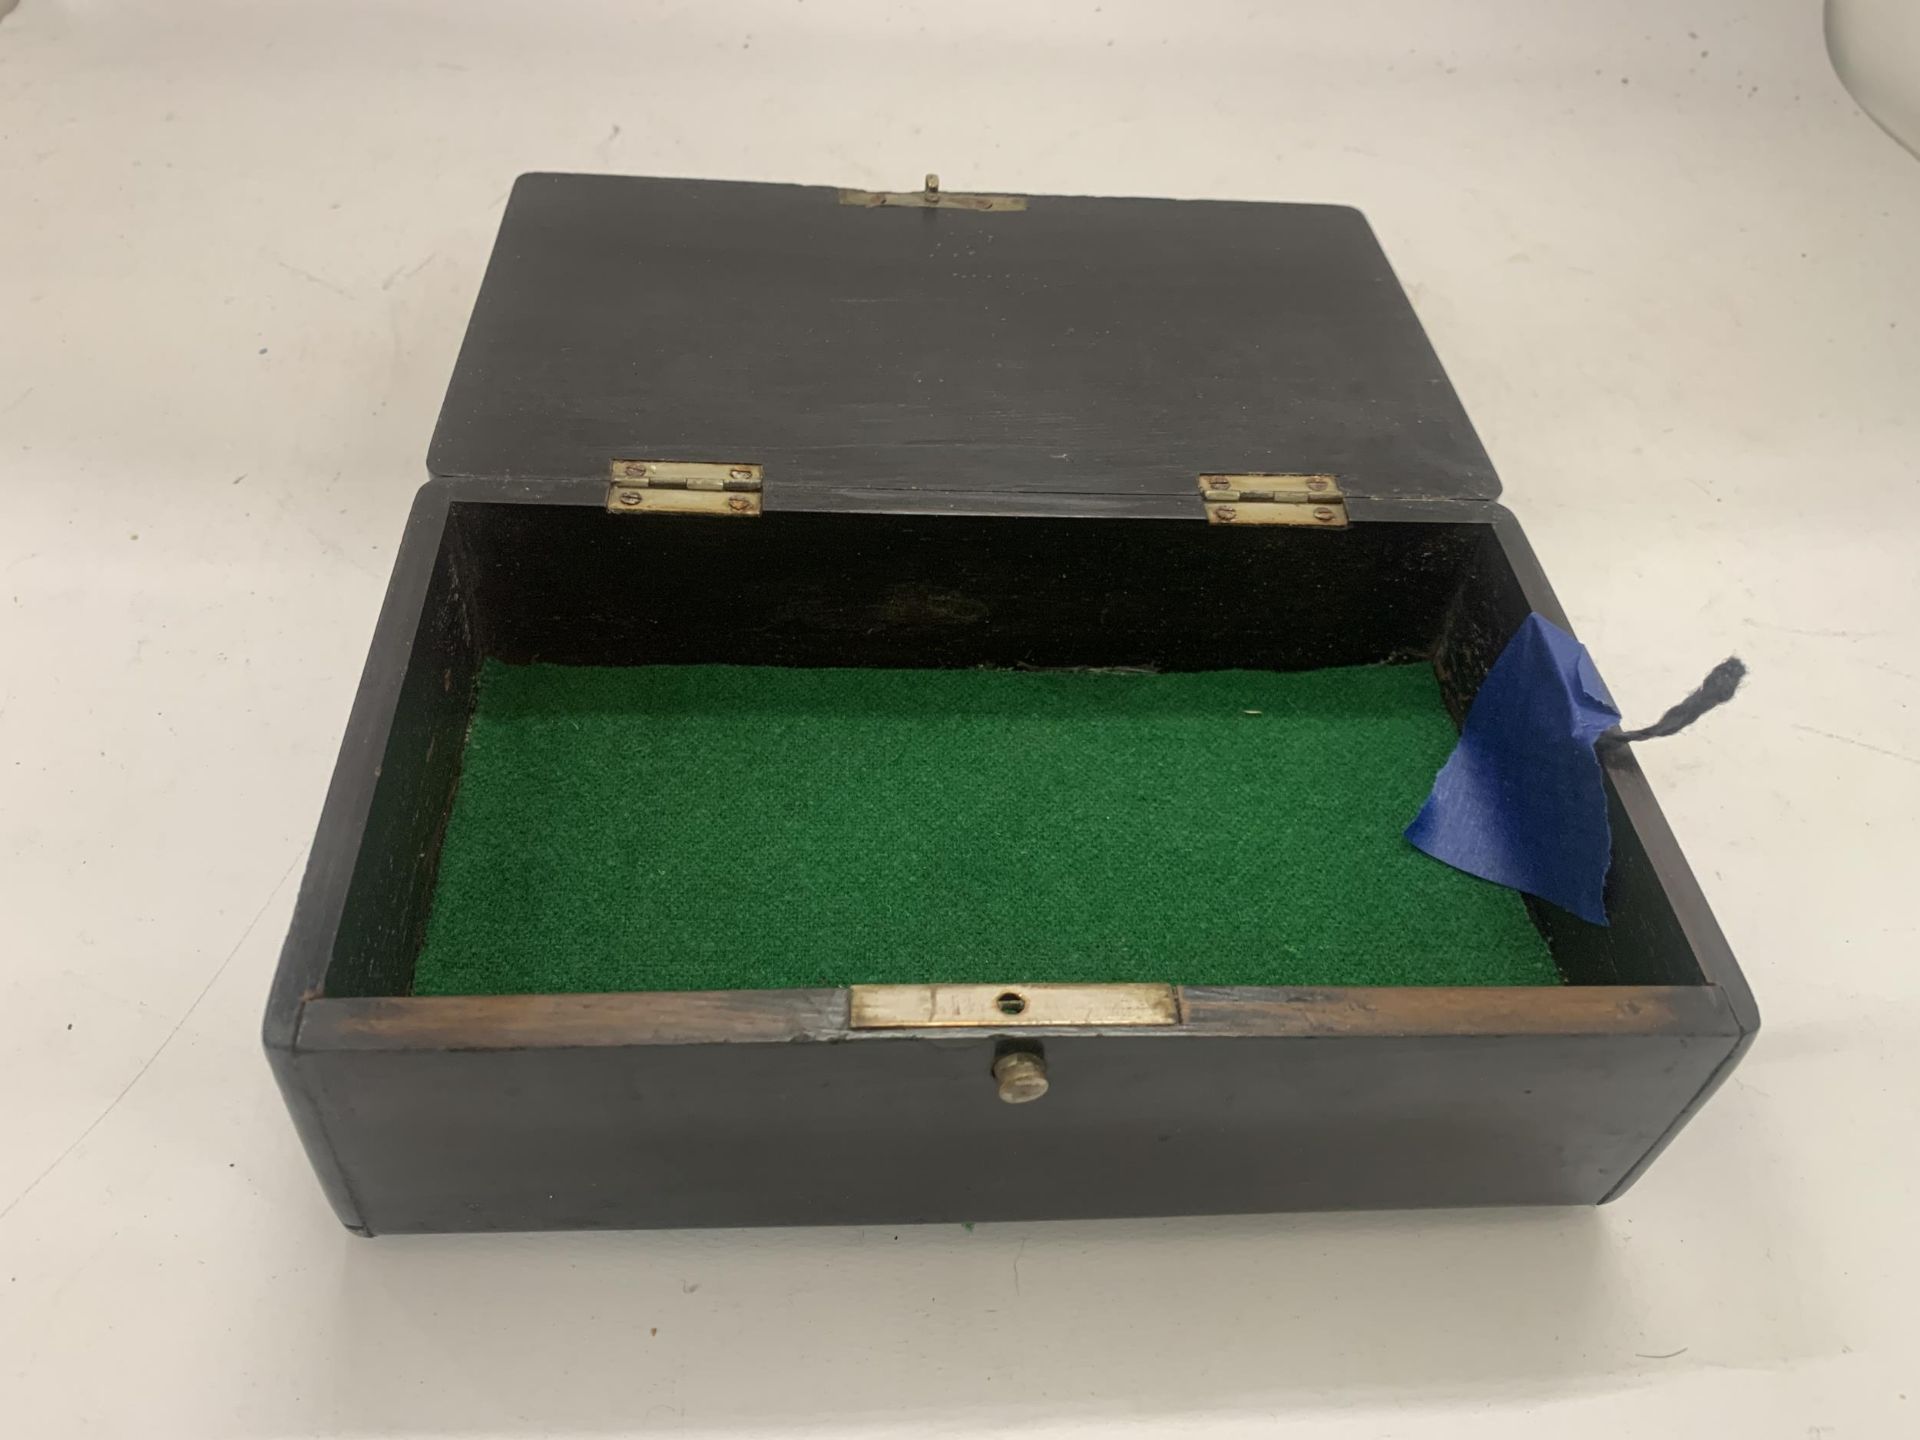 A VINTAGE EBONY BOX WITH HALLMARKED LONDON SILVER EDGES - Image 2 of 3